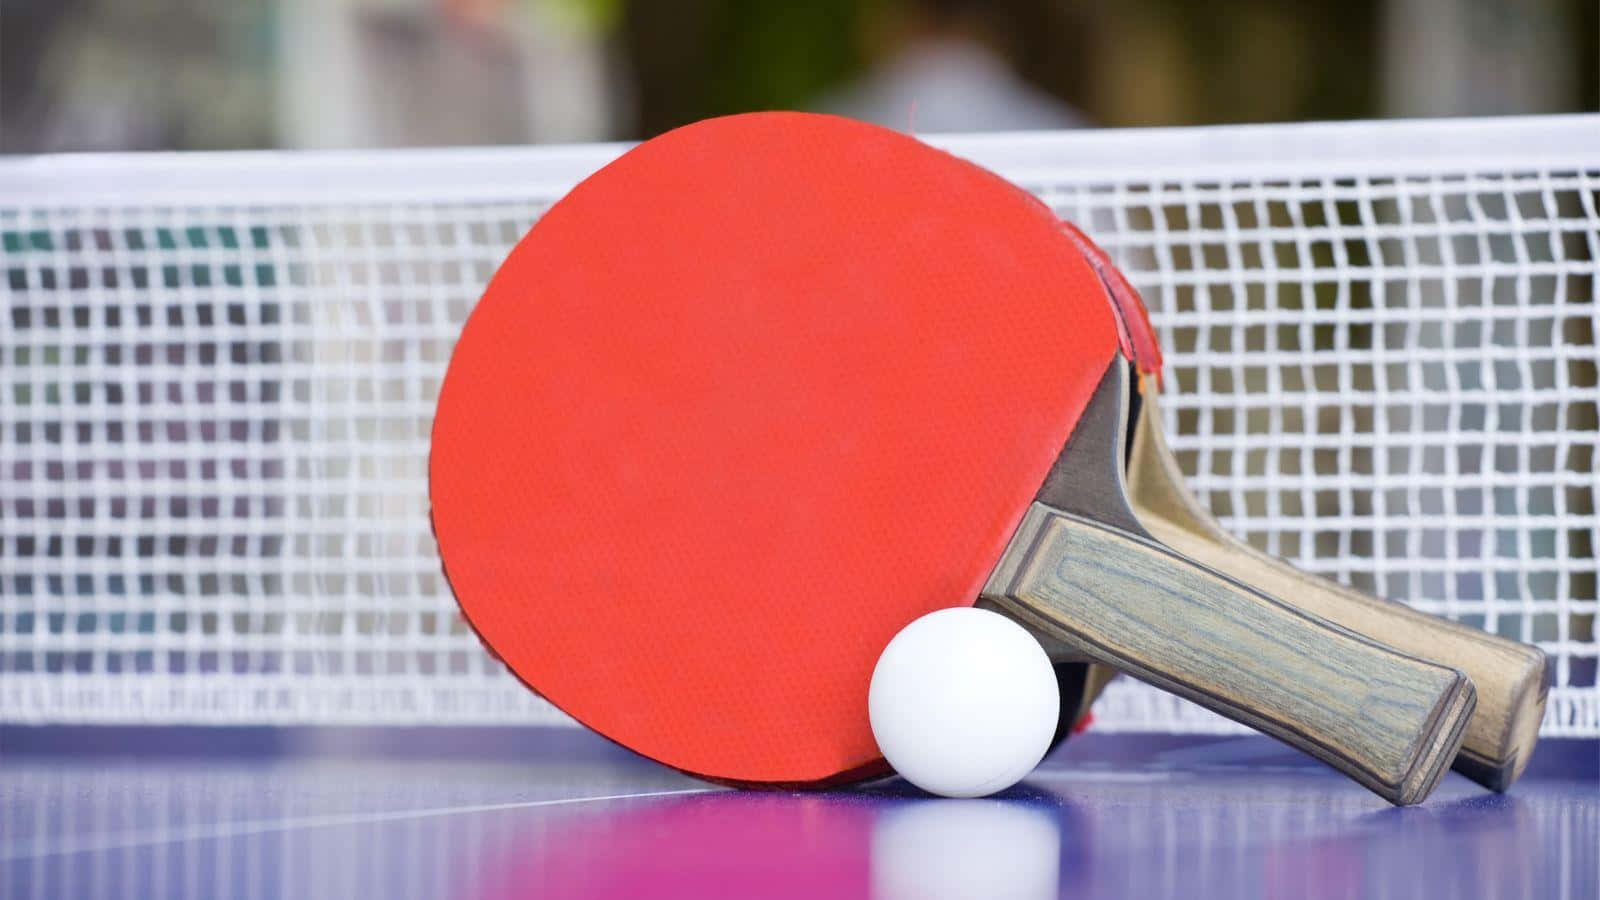 A Ping Pong Paddle And Ball On A Table